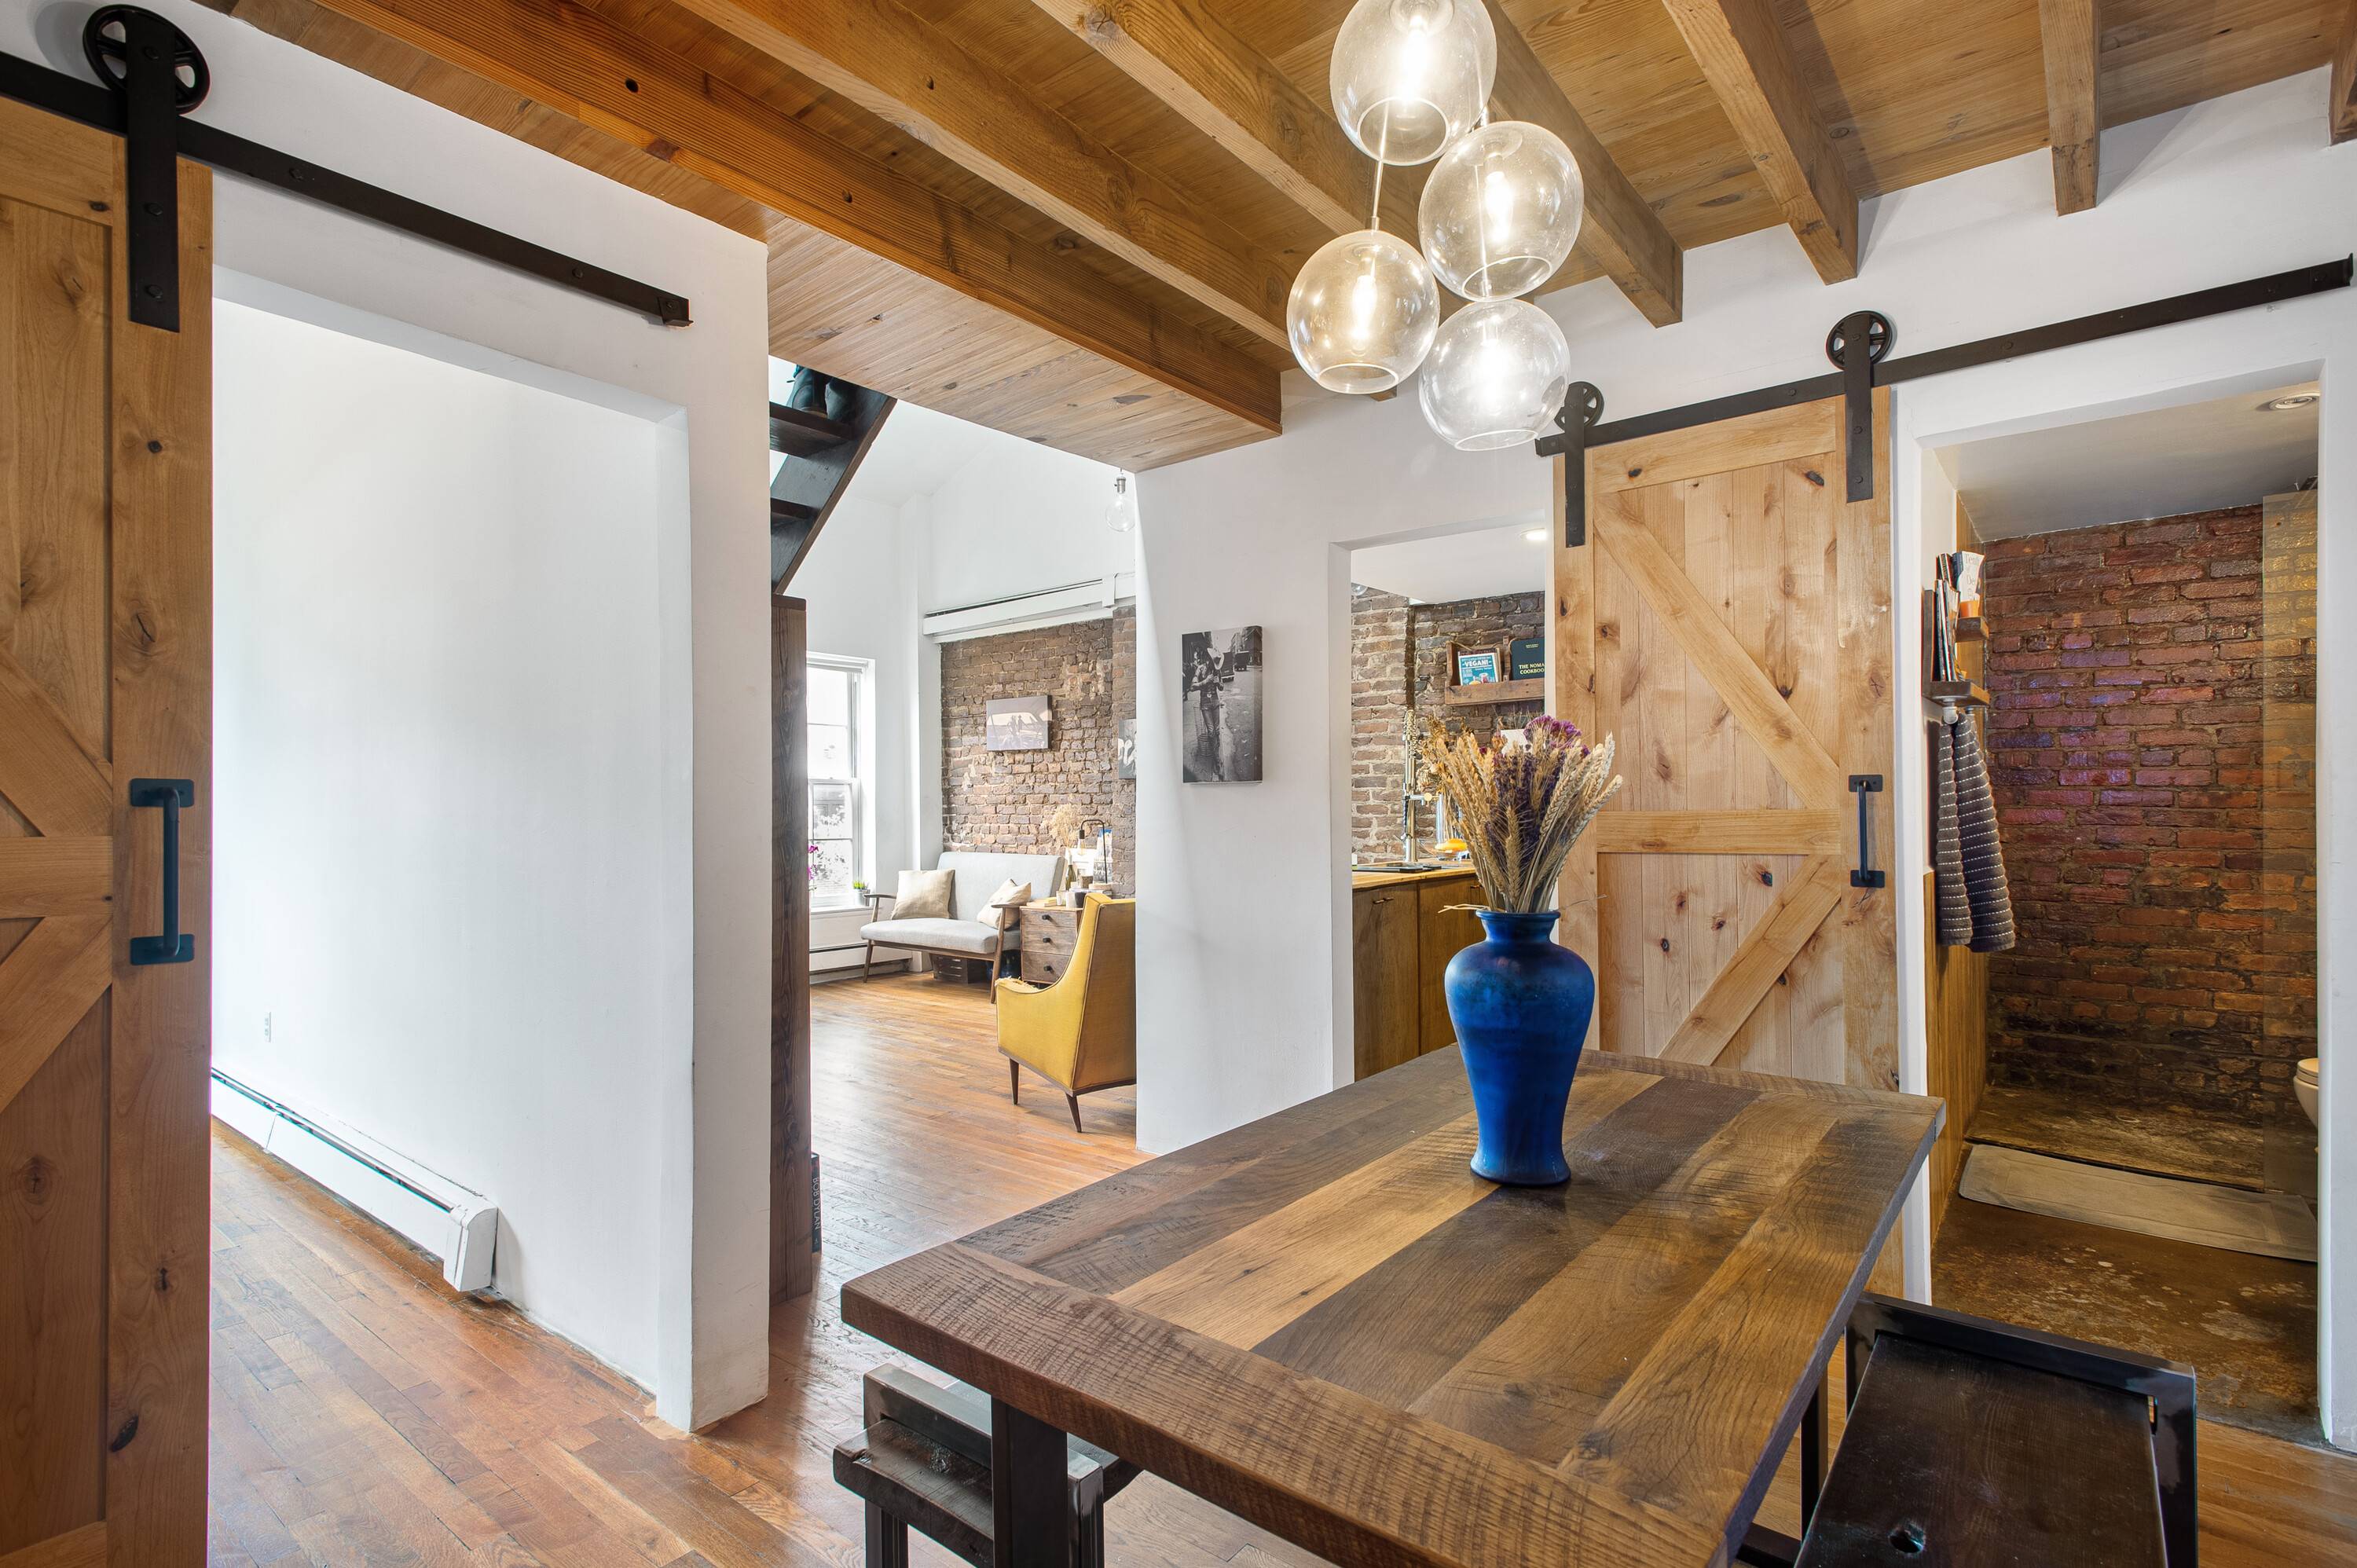 SUNNY DUPLEX APARTMENT IN THE HEART OF BROOKLYN HEIGHTS